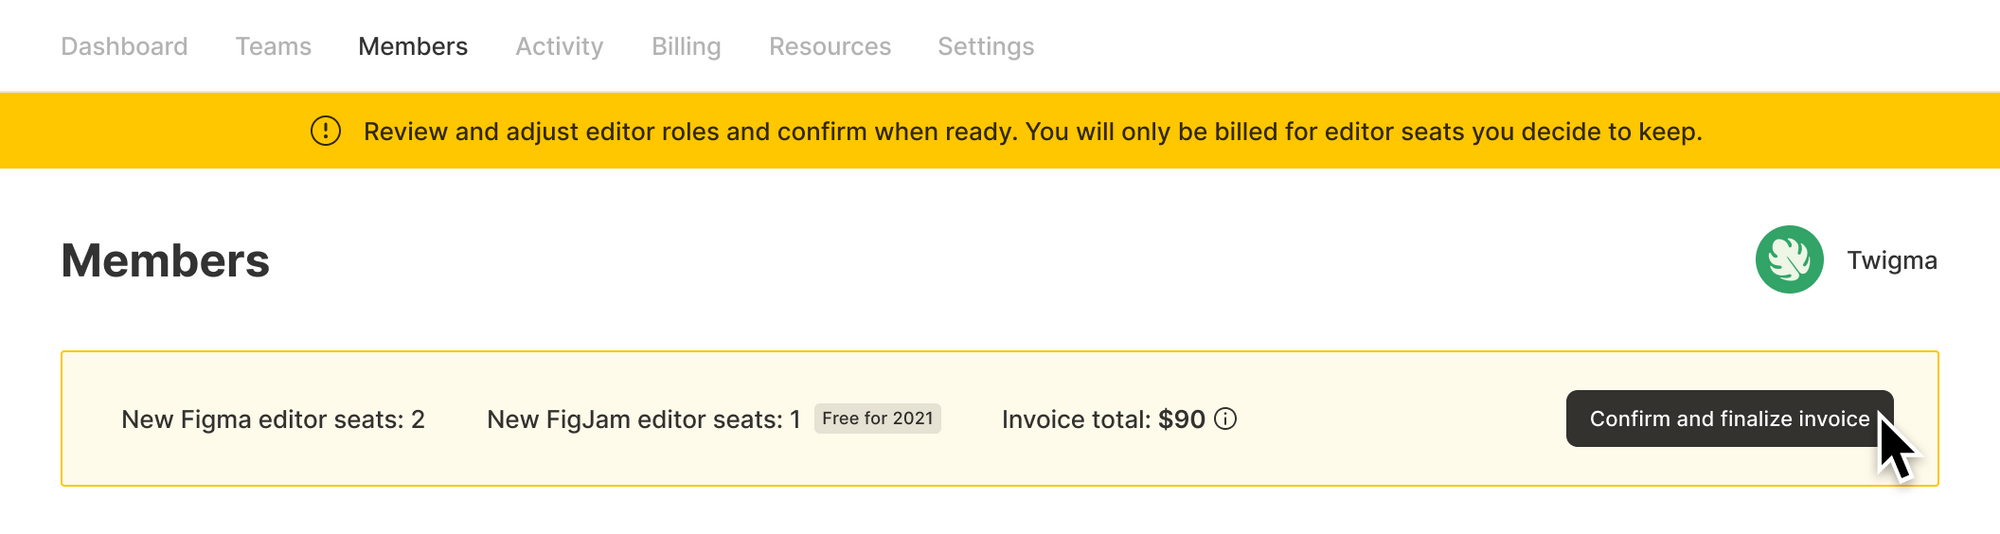 A screenshot of the Billing tab showing the button to confirm and finalize invoice